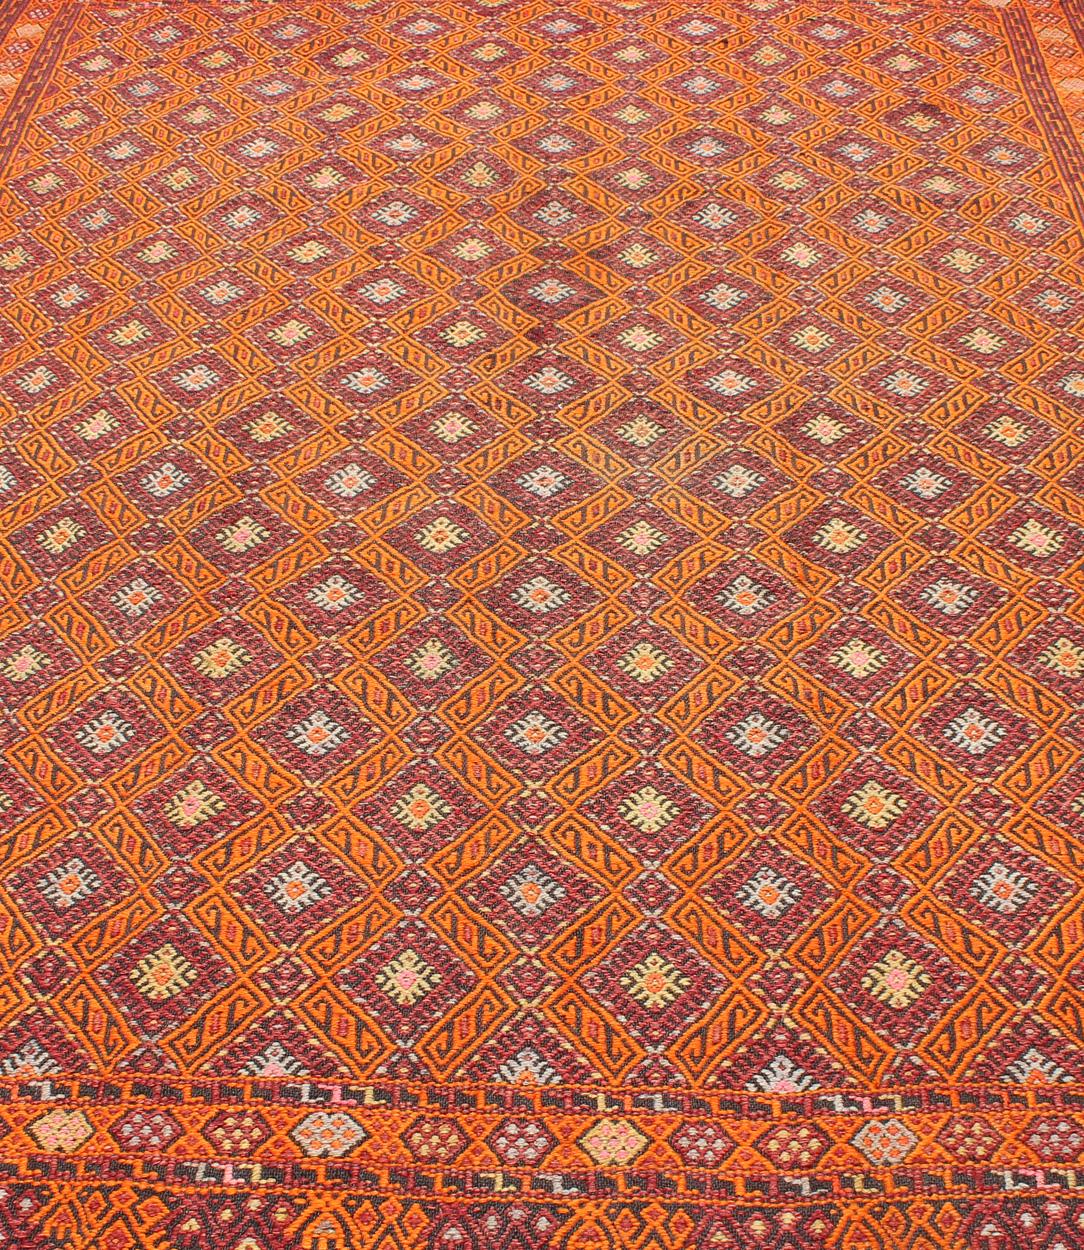 Vintage Embroidered Kilim in Orange, Red, light Blue and yellow Colors 2